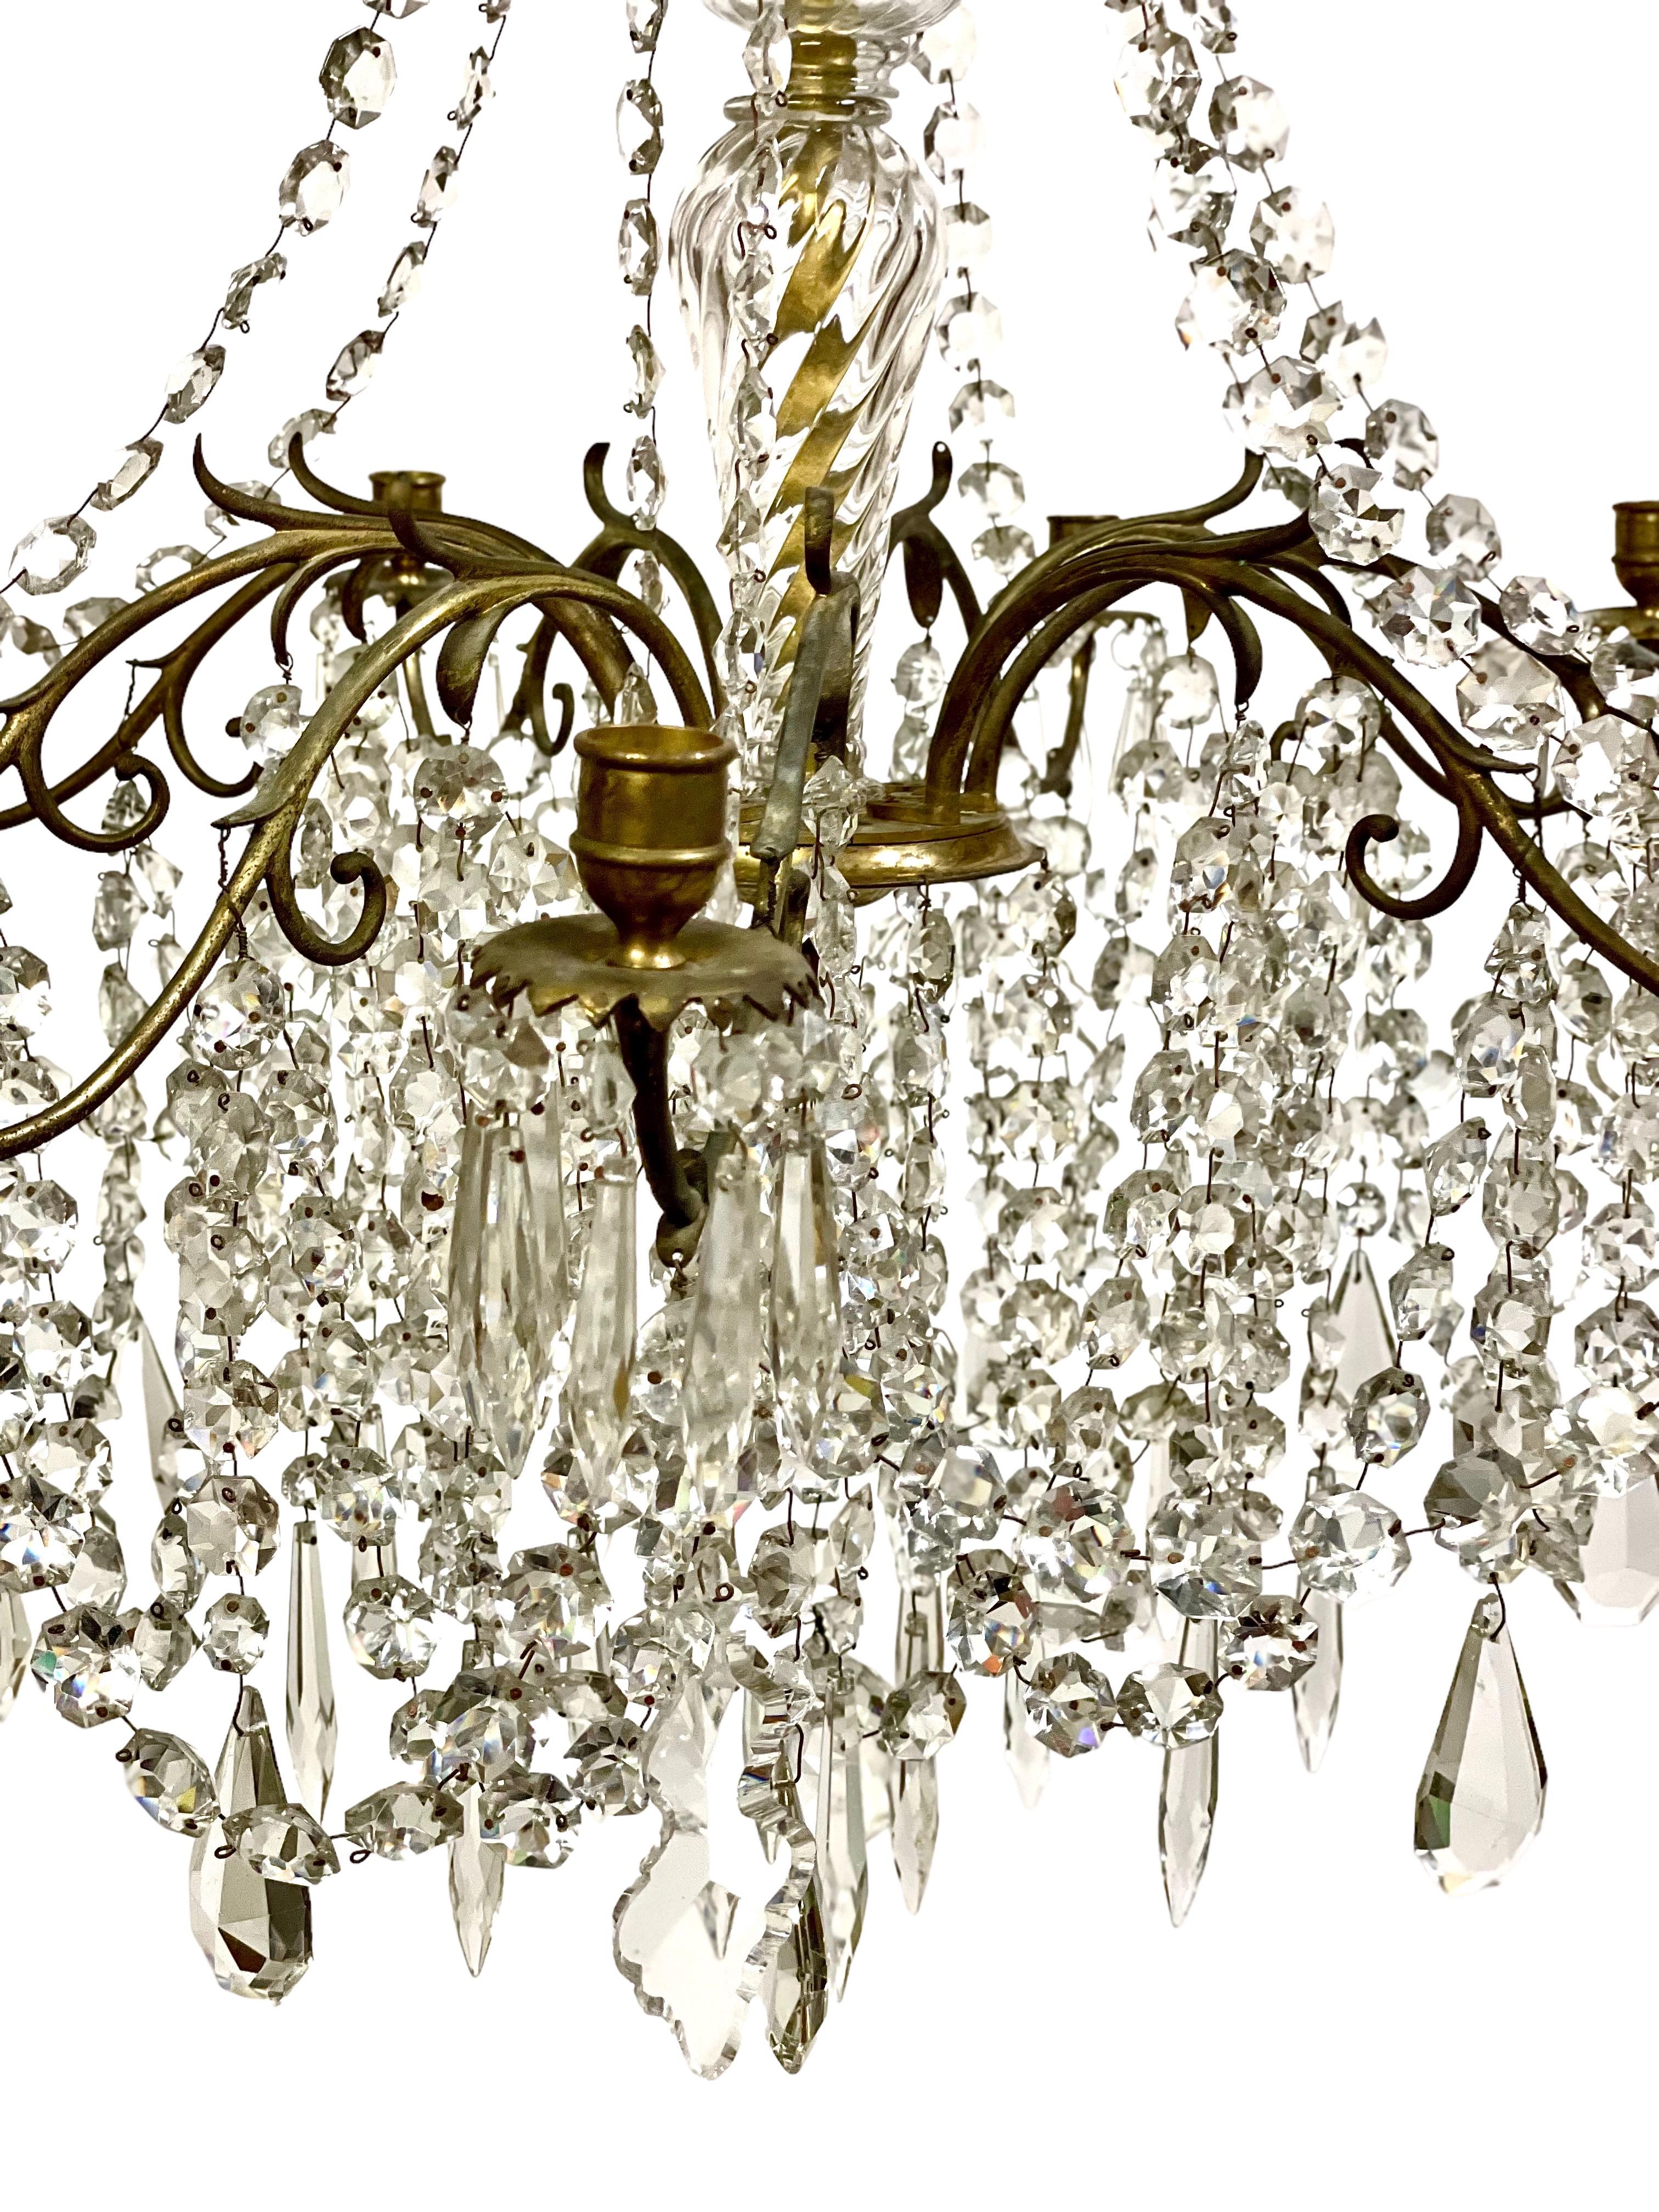 A fabulous, traditional gilt brass, bronze and cut crystal chandelier of nine lights, dating from the second half of the 19th century. This outstanding piece is richly decorated with sweeping crystal chains and glittering pendants encircling a